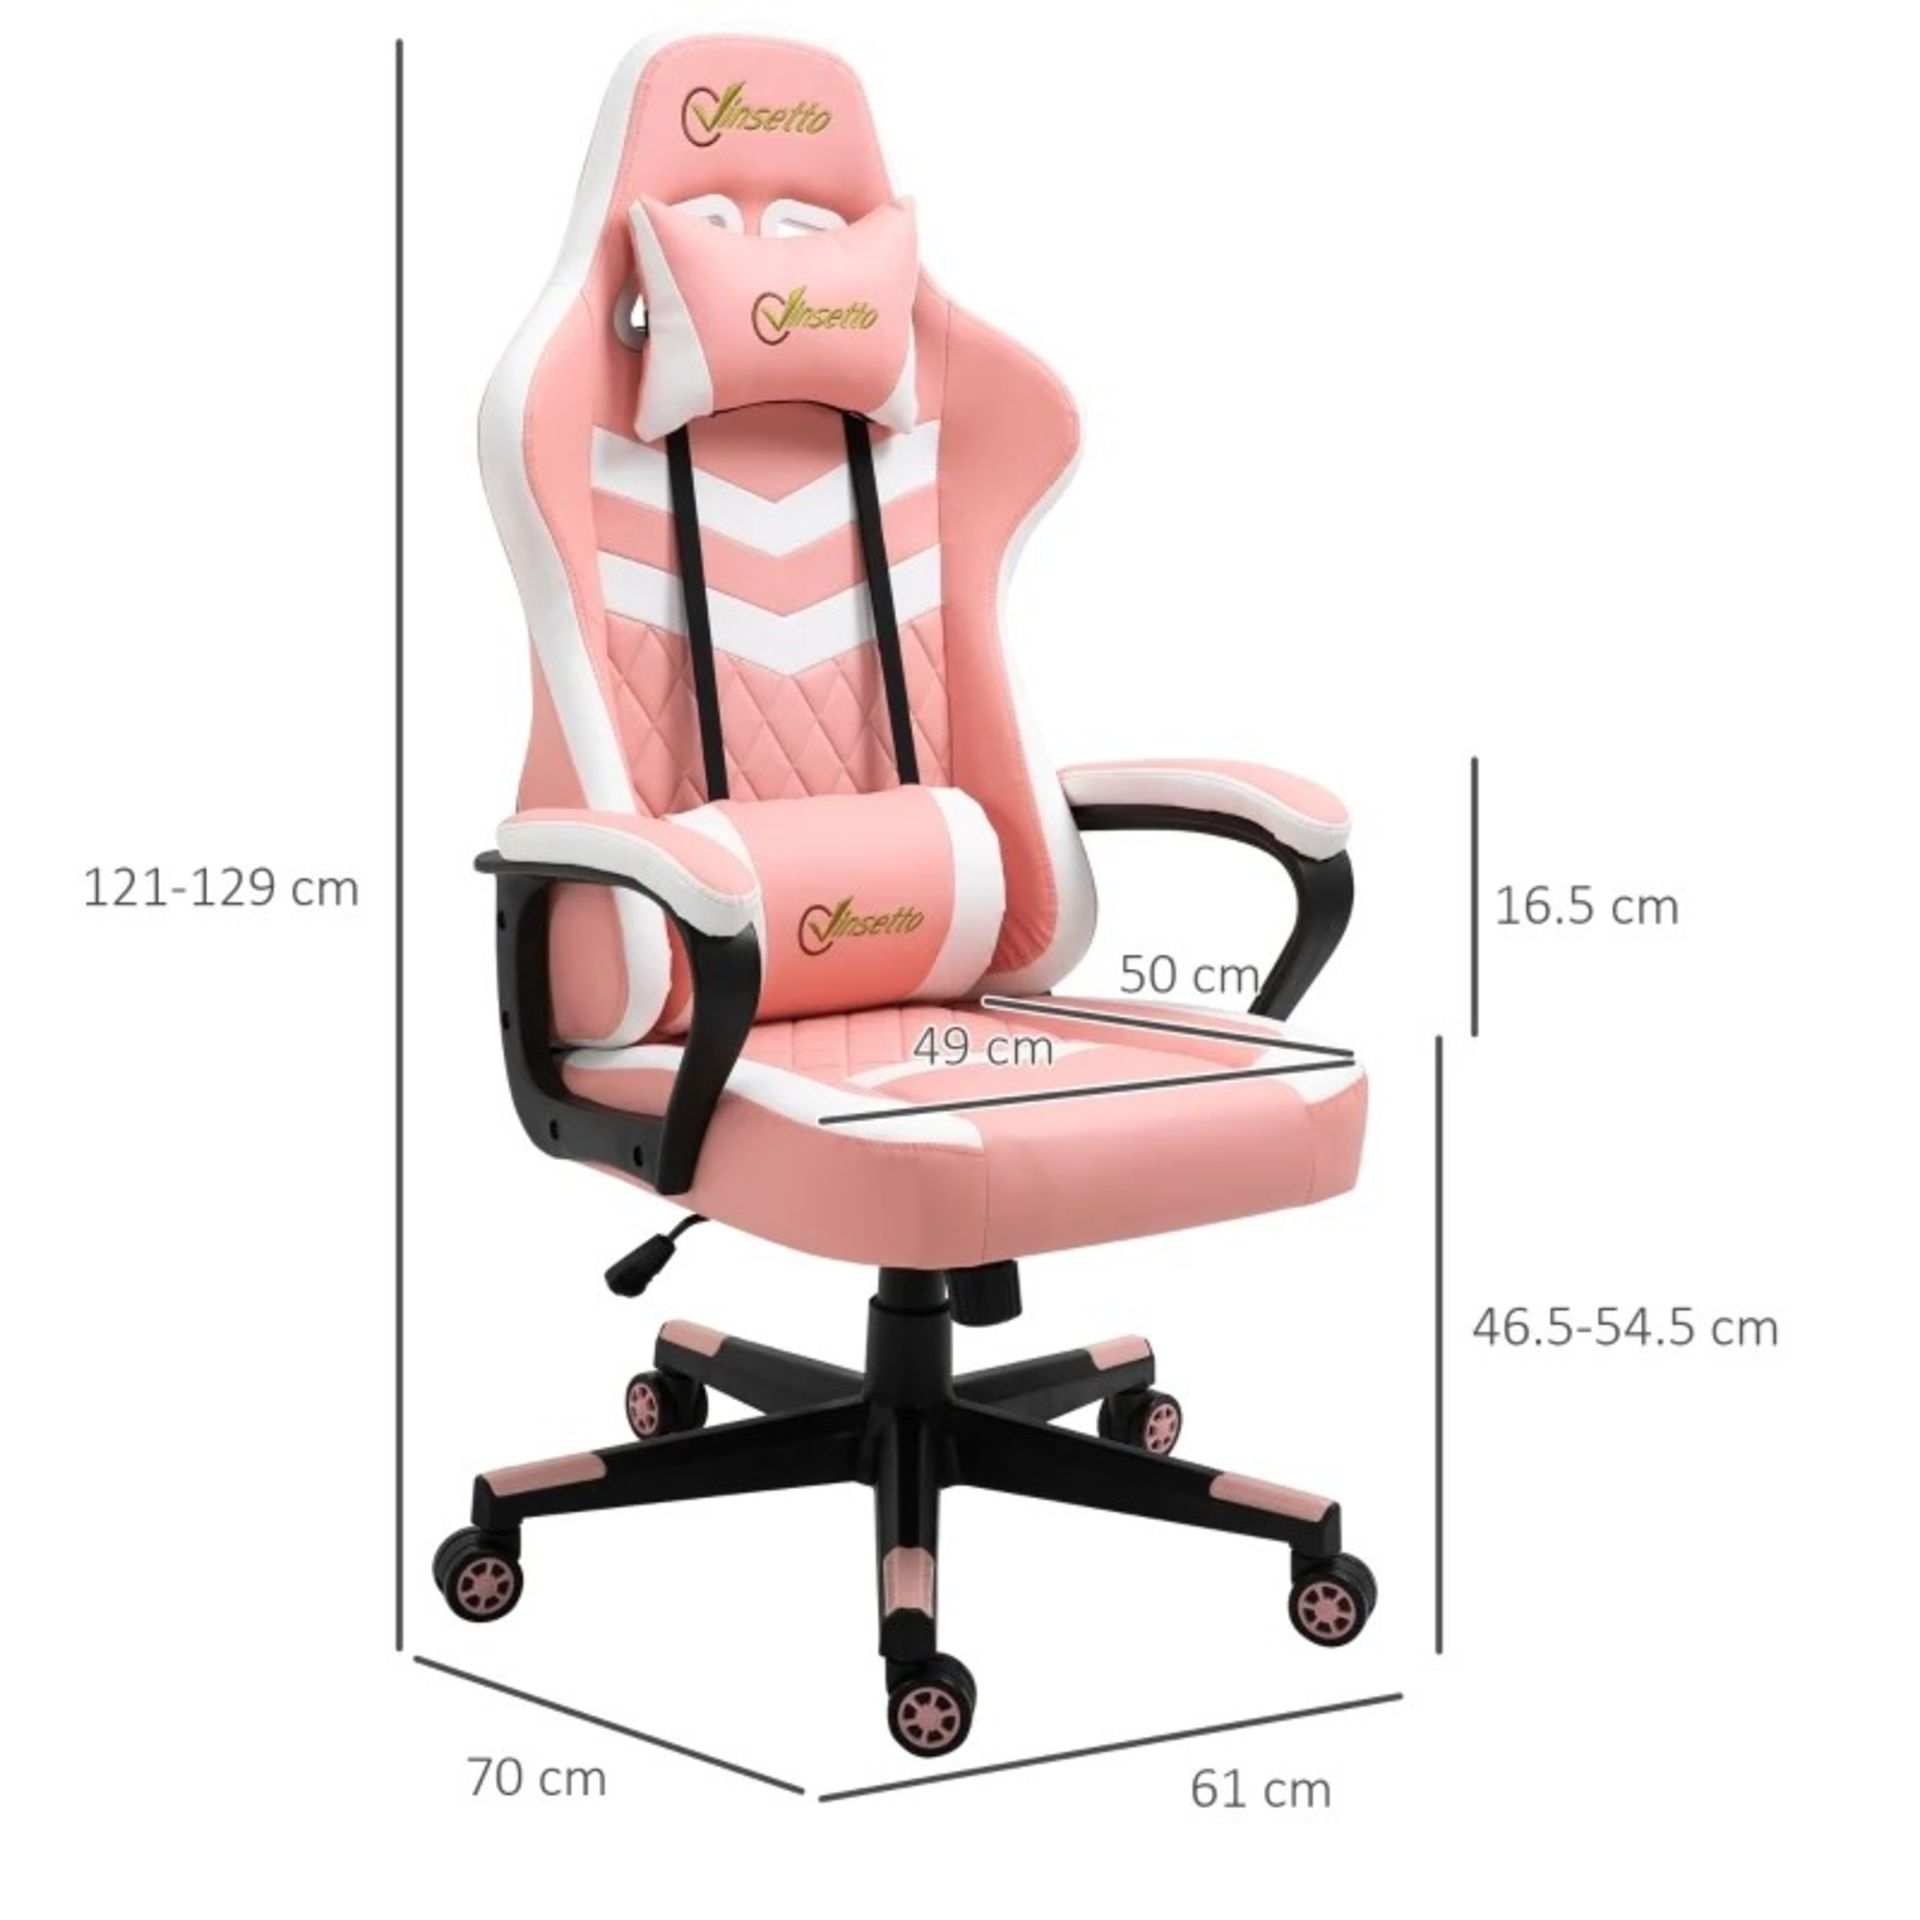 RRP £146.99 - Vinsetto Racing Gaming Chair w/ Lumbar Support, Headrest, Gamer Office Chair, Pink - Image 2 of 4